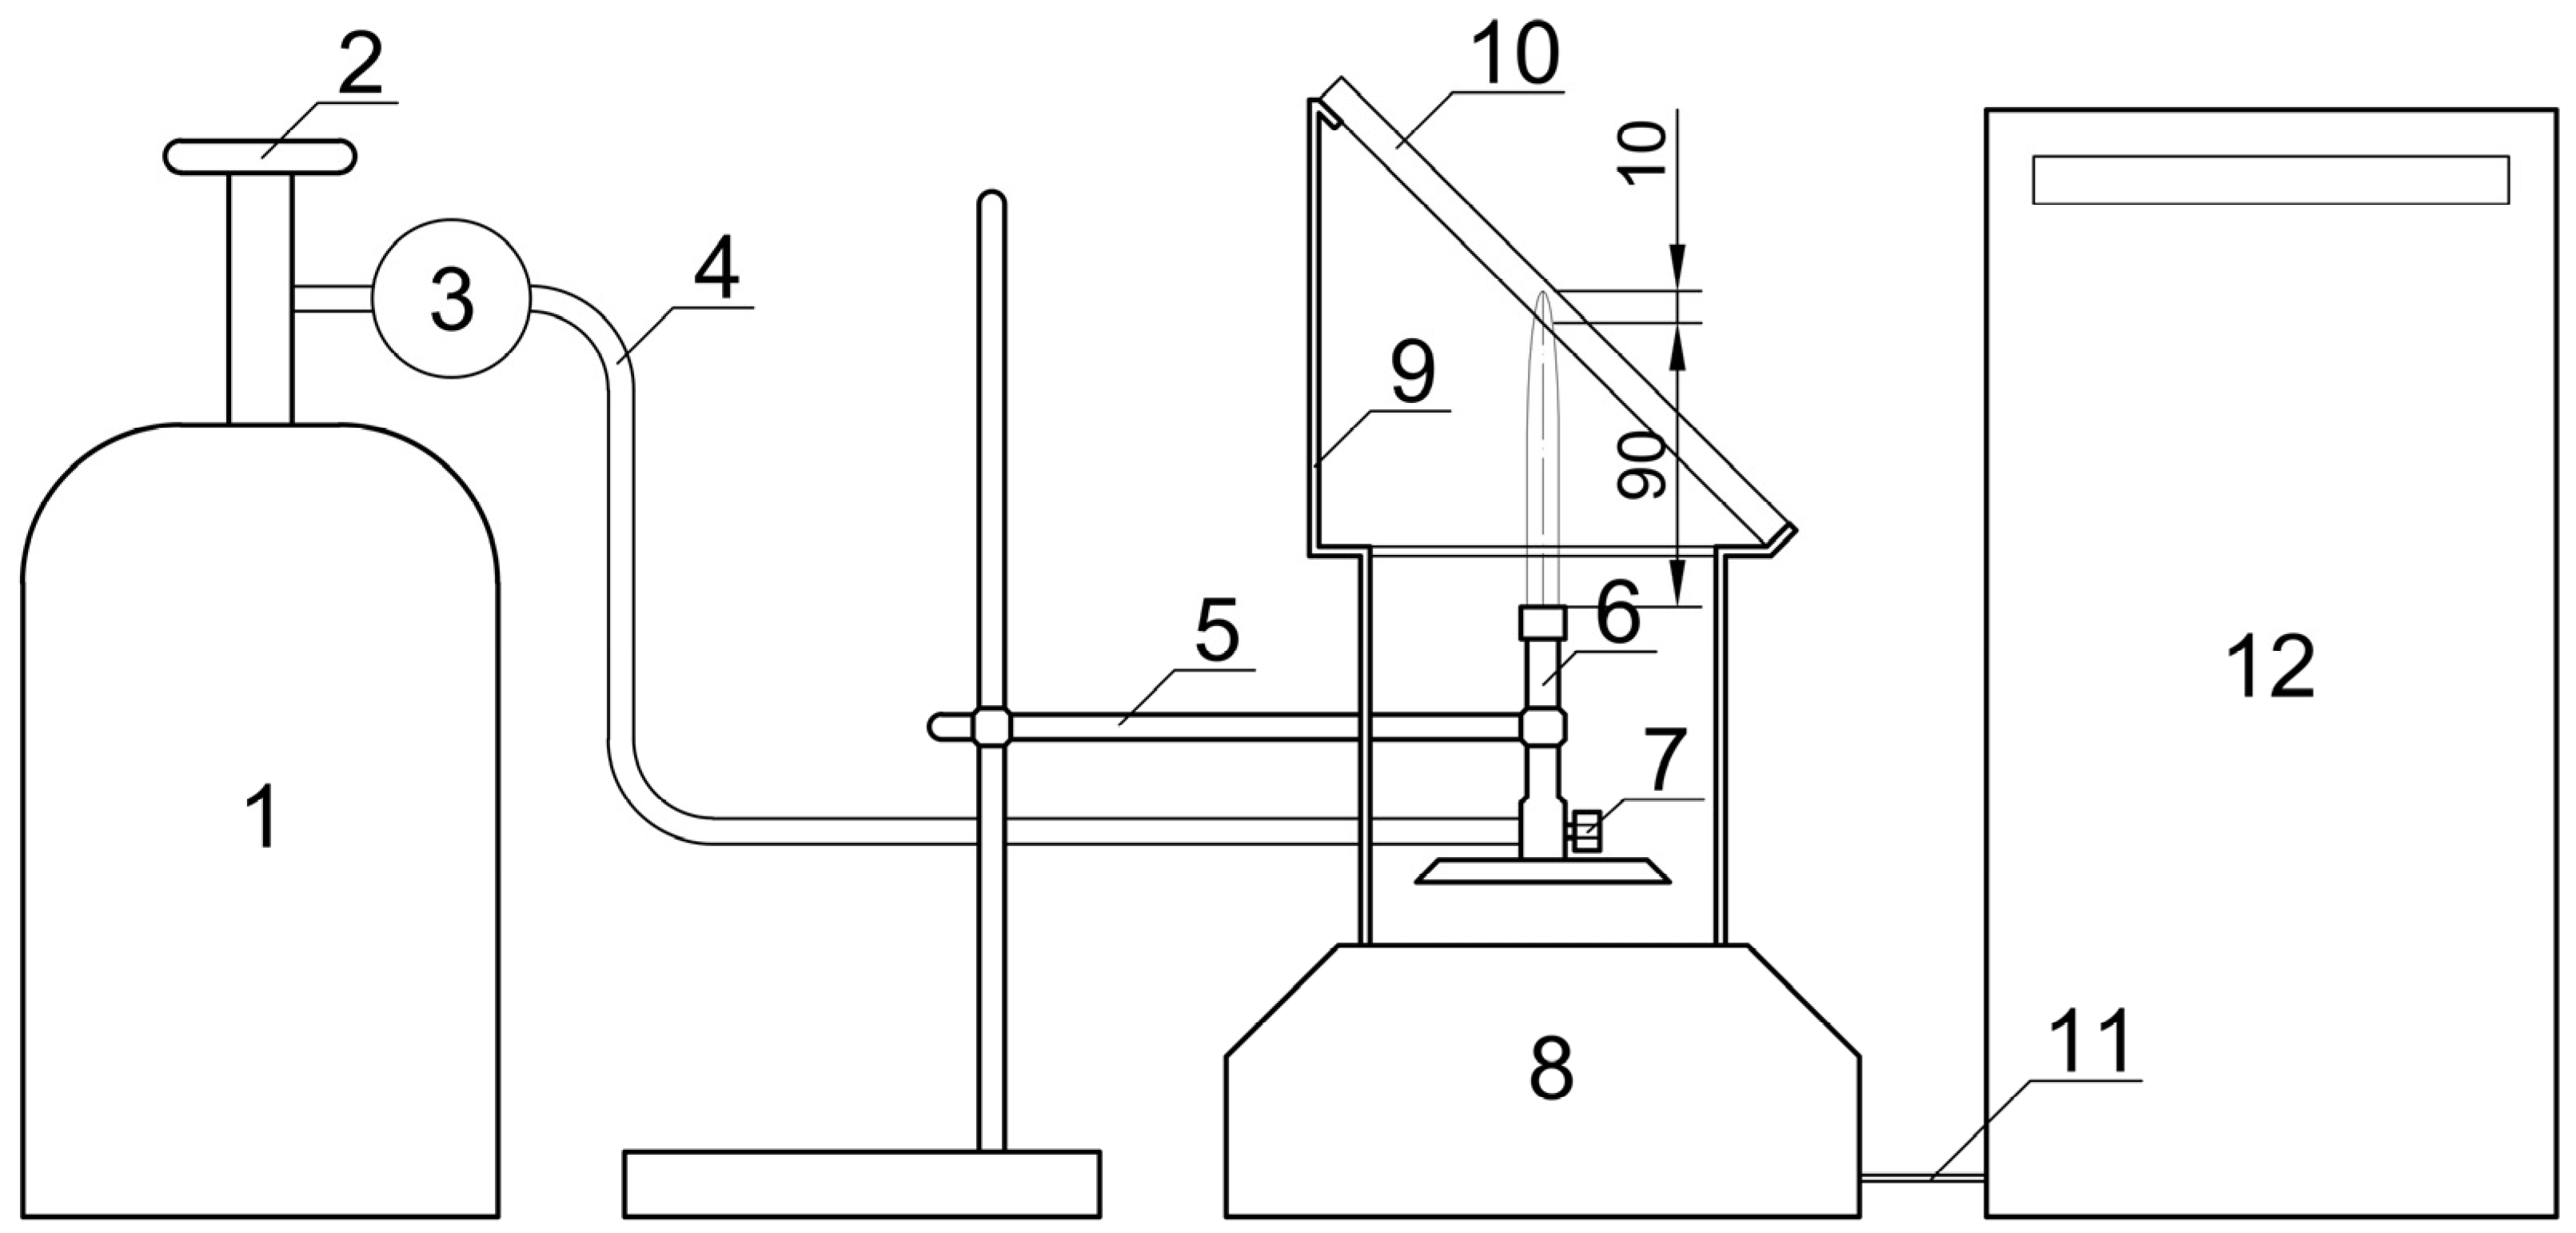 Schematic diagram of the hot press used for densification of the samples